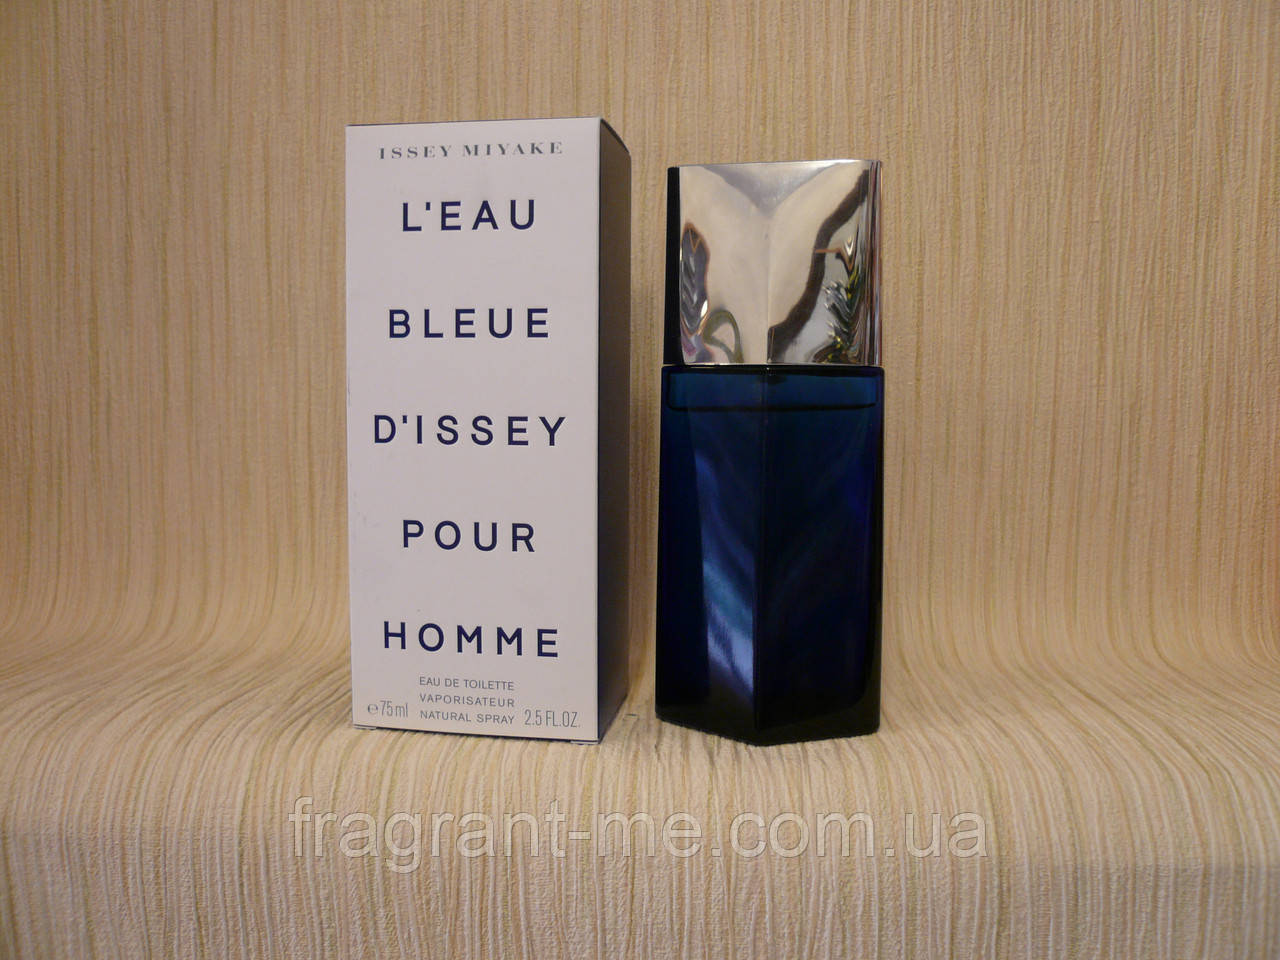 Issey Miyake l'eau Bleue d'Issey Pour Homme